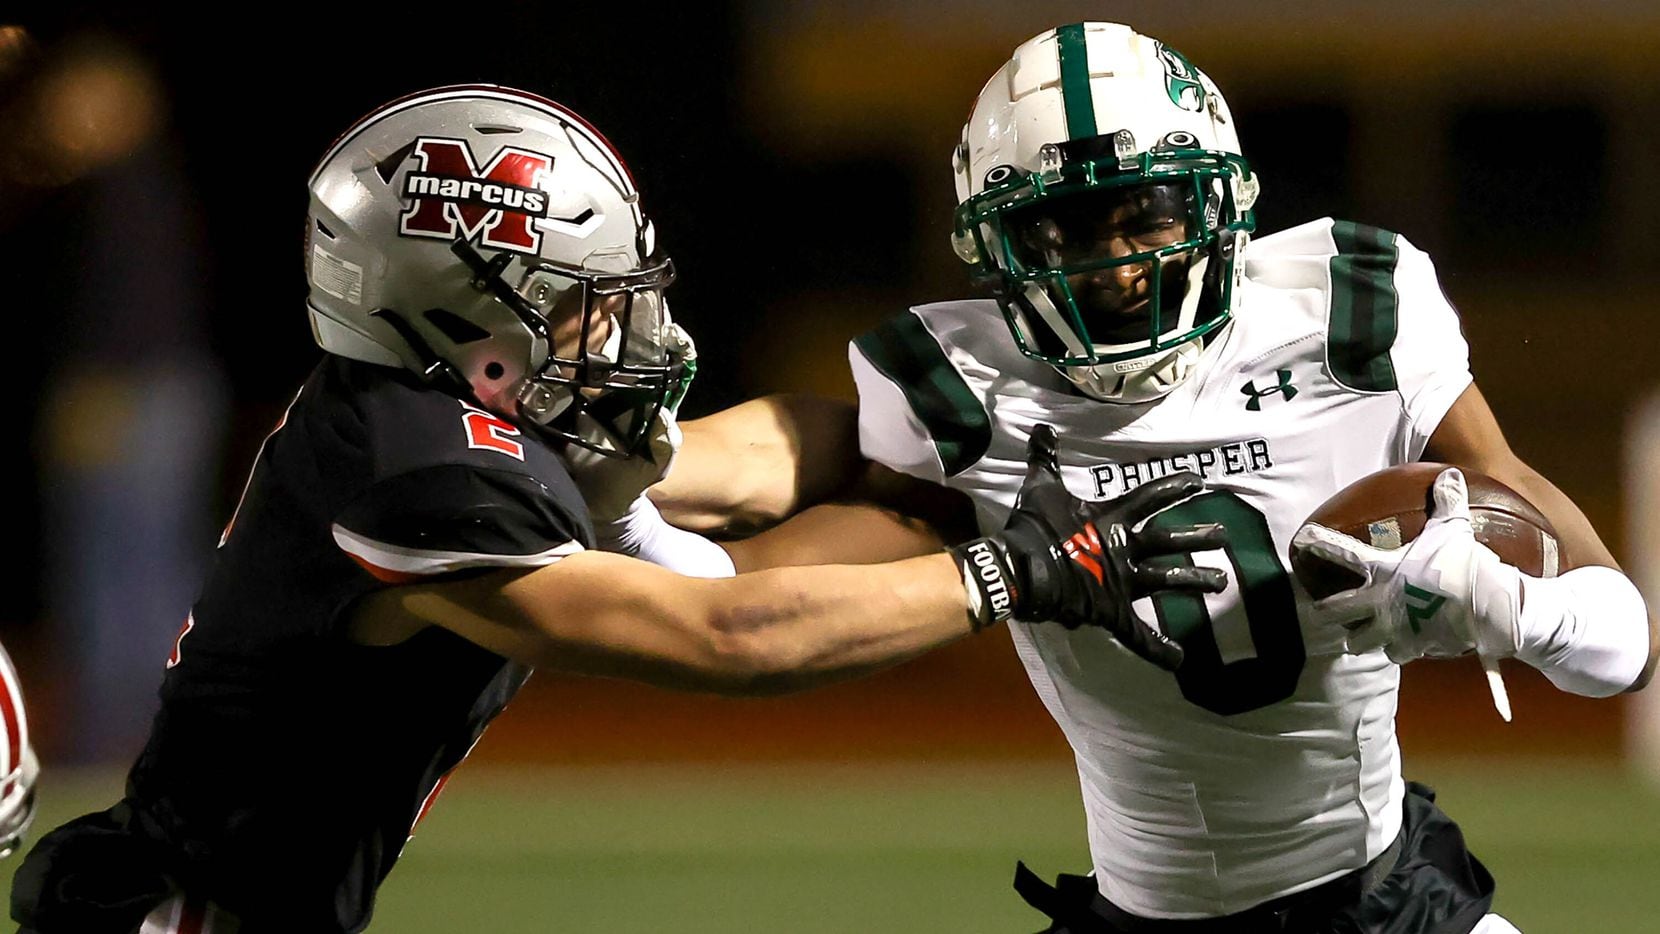 Prosper wide receiver Tyler Bailey (0) gives a stiff arm to Flower Mound Marcus defensive back Jake Ballard (2) during the first half in a Class 6A Division II bi-district high school football game played at Marcus Marauders Stadium, Friday, November 12, 2021, in Flower Mound. (Steve Nurenberg/Special Contributor)